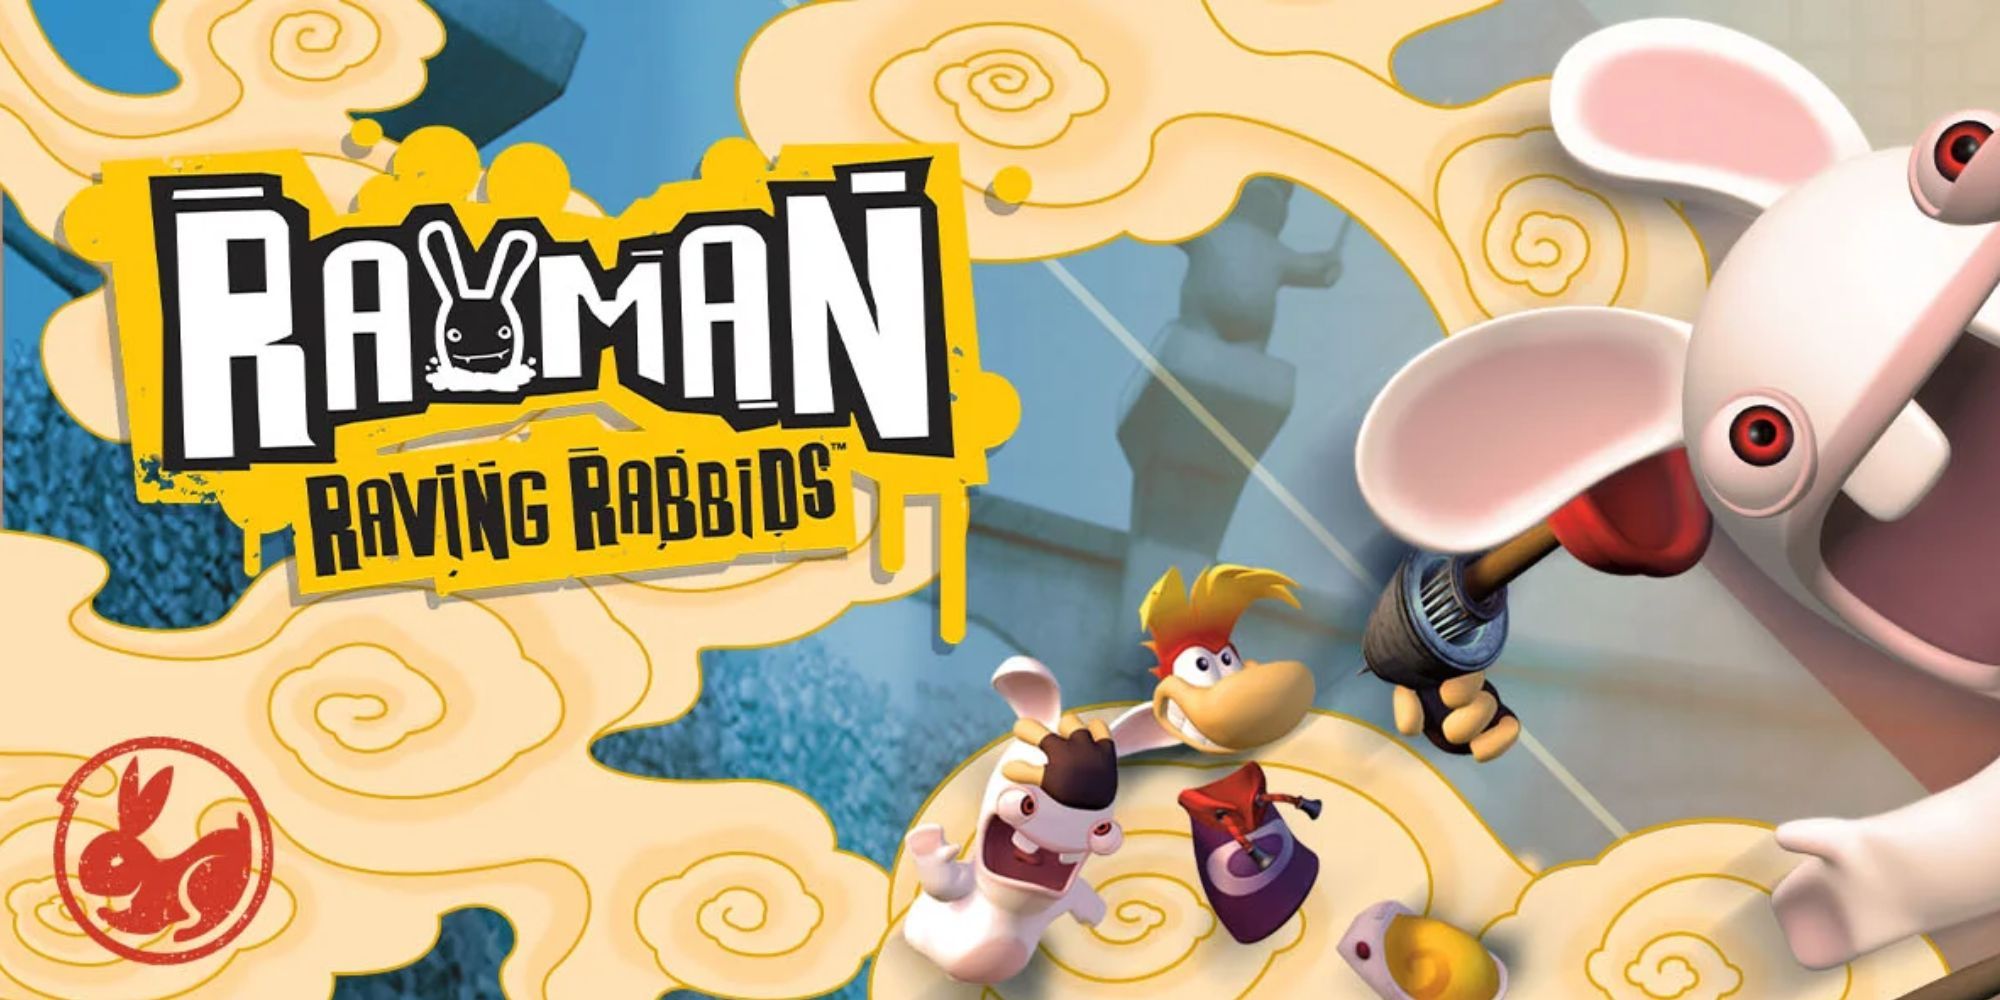 Rayman Raving Rabbids are part of the Year of the Rabbit.